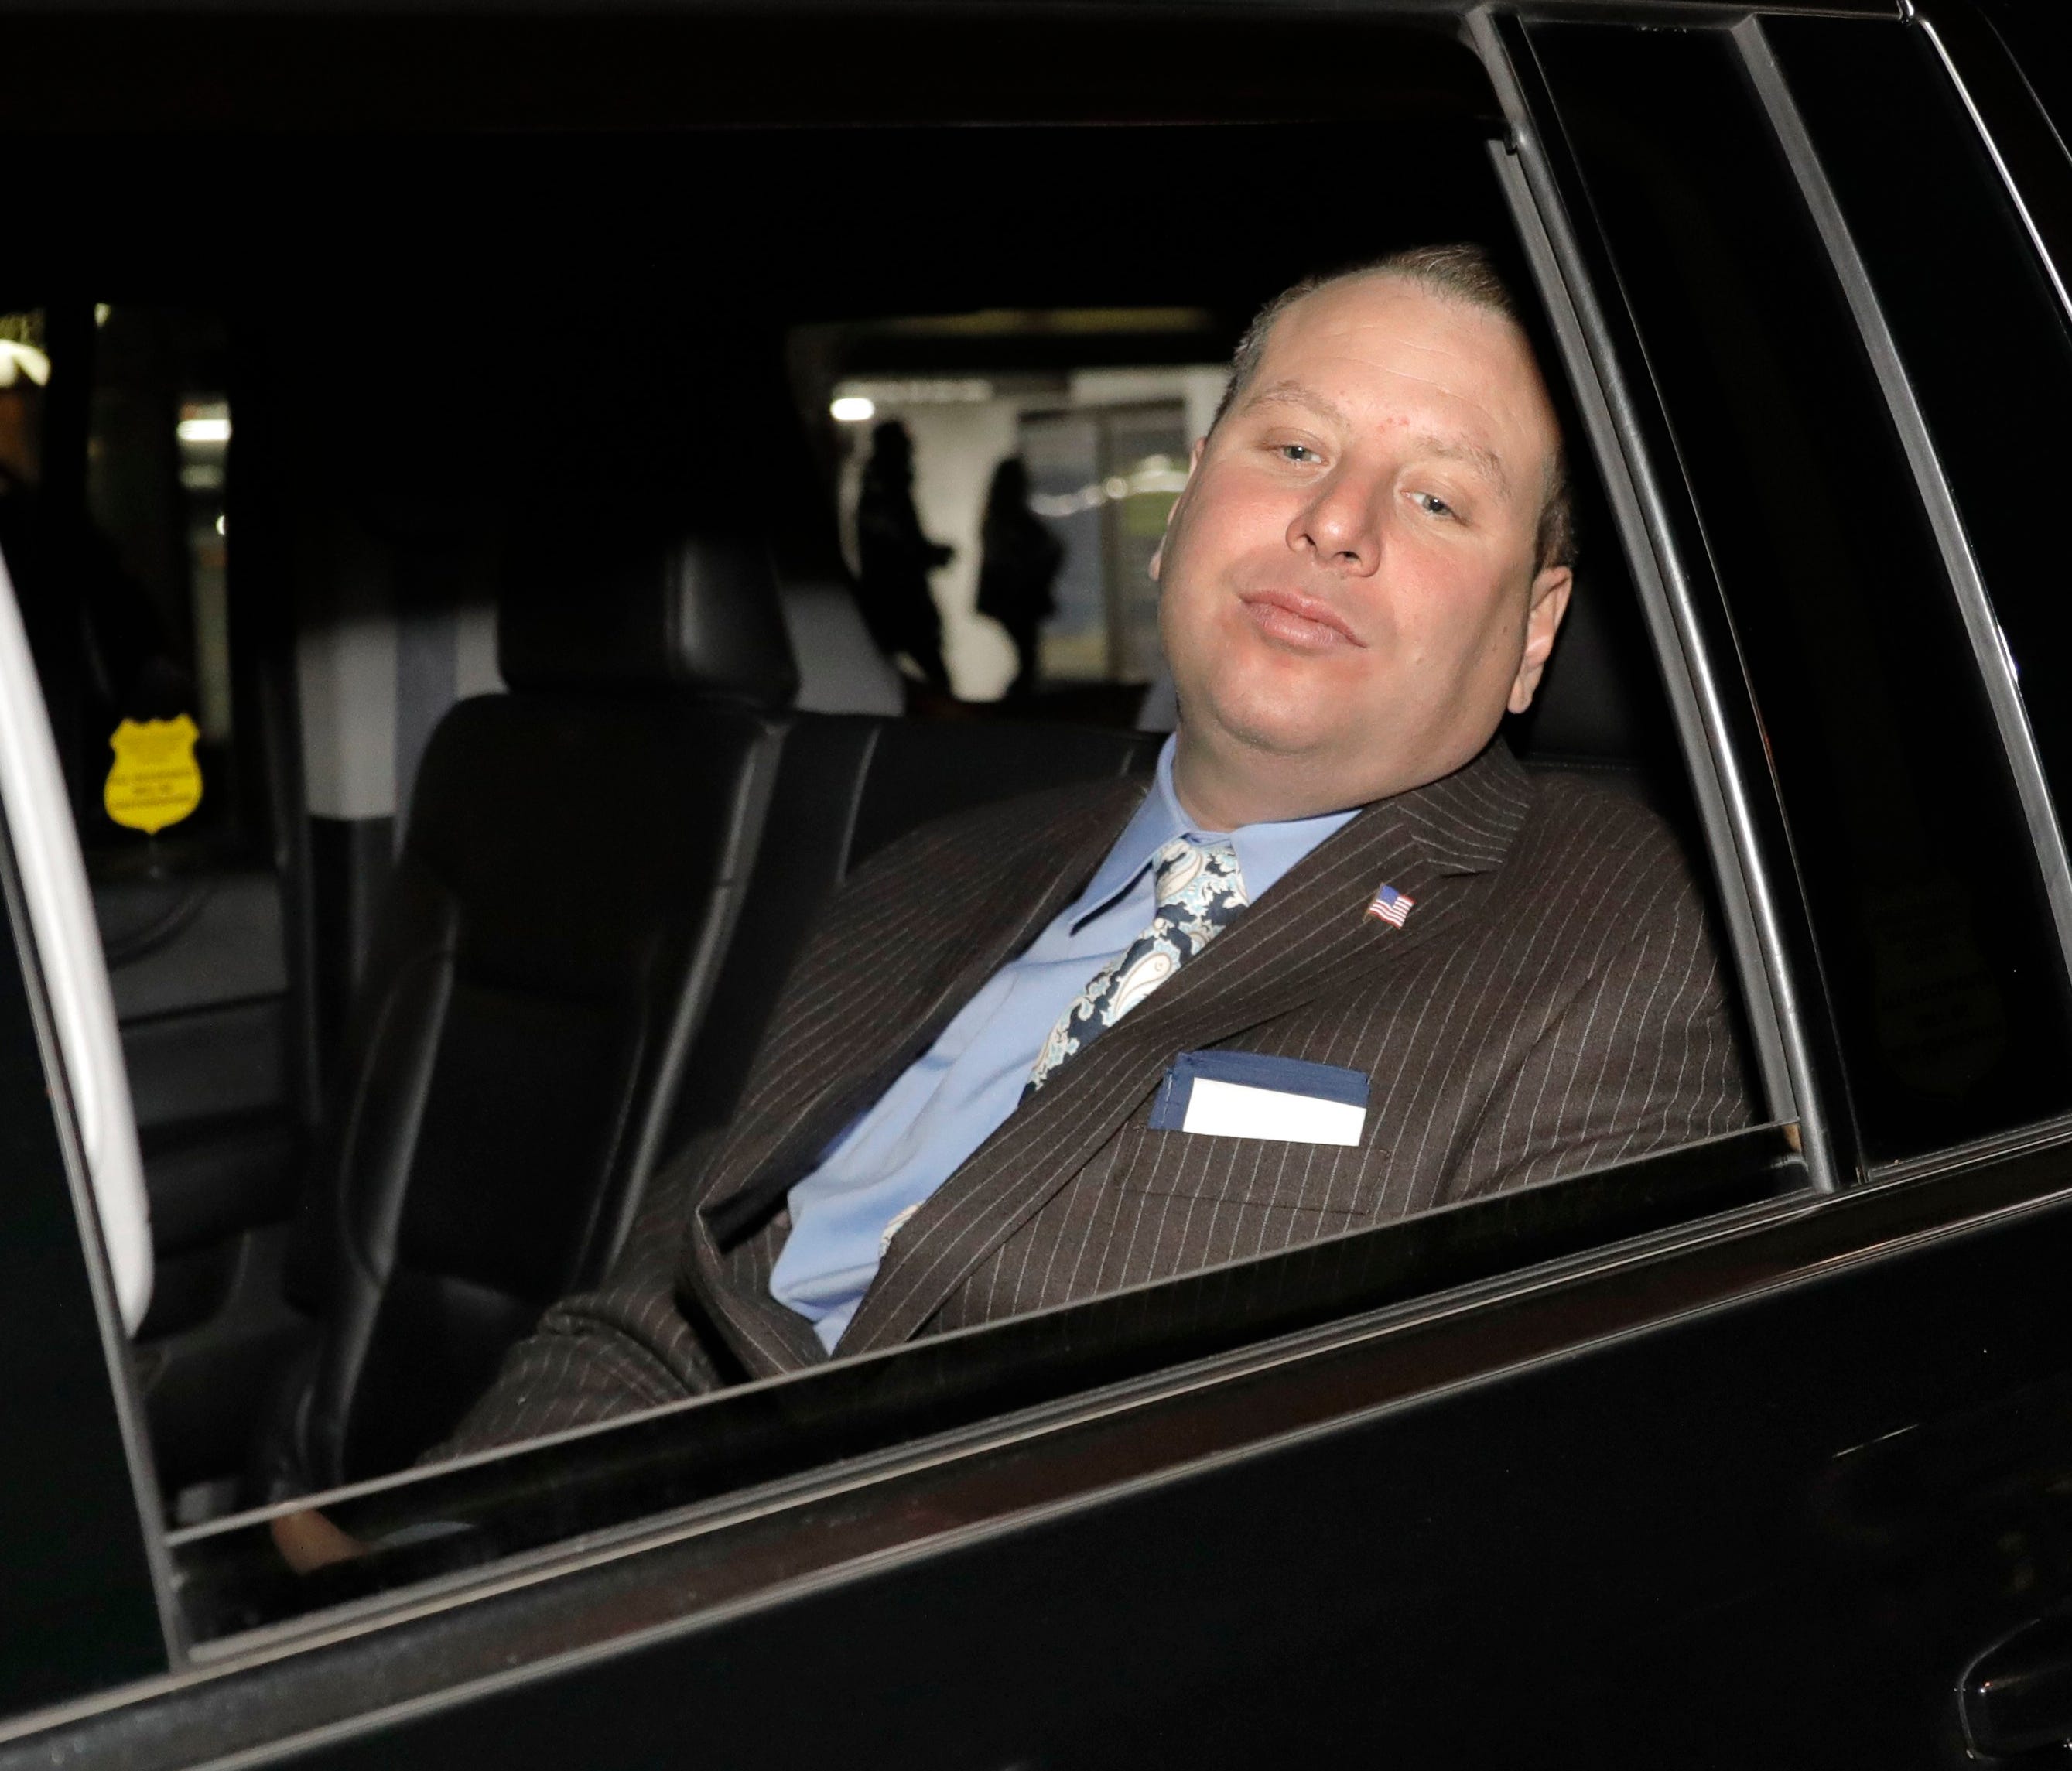 Former Trump campaign aide Sam Nunberg leaves in a car after being interviewed at the CNN News headquarters in New York, on March 5, 2018.